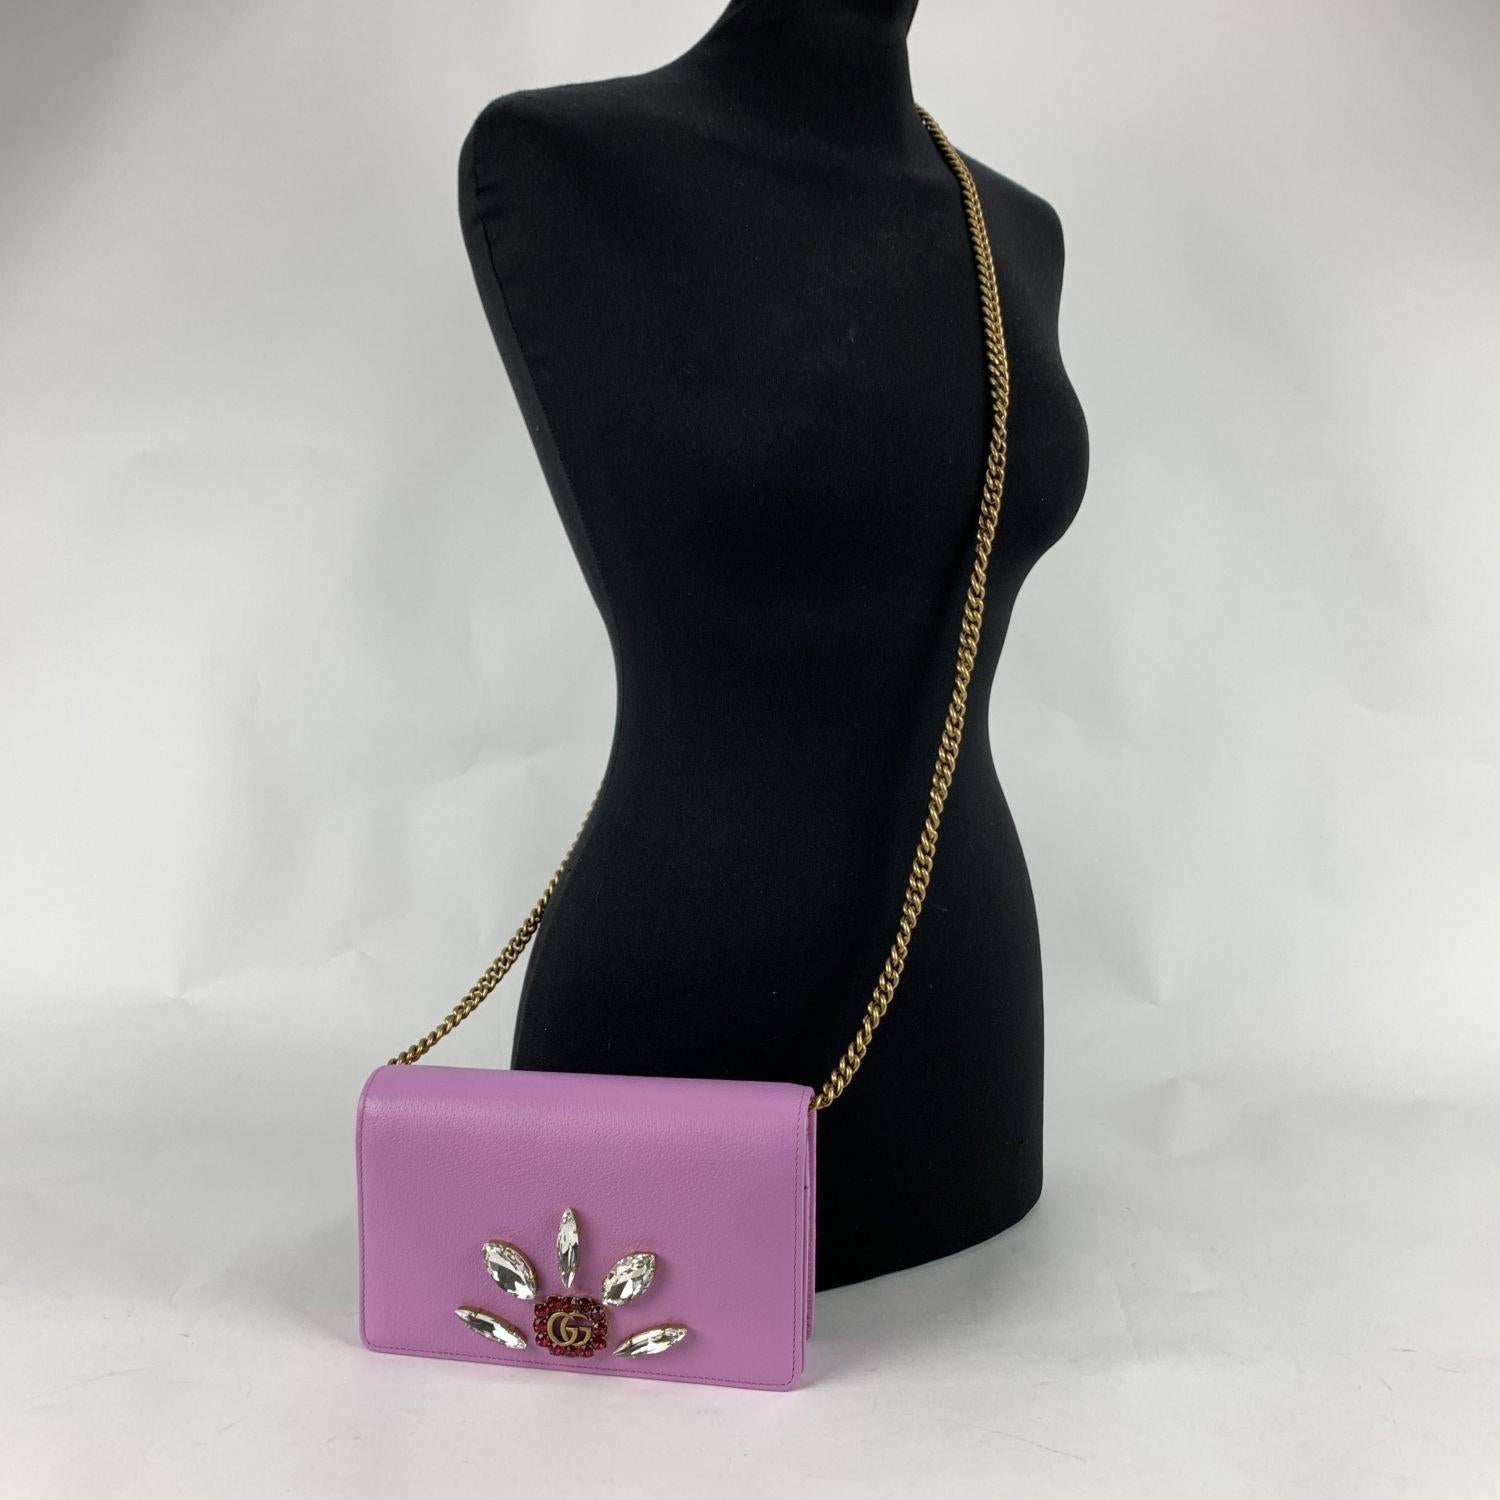 Beautiful Gucci Mini Double G Wallet on Chain in pink leather embellished with crystals. The bag features a flap with button closure, built-in mirror on the reverse of the flap and 1 slit pocket under the flap. Black nylon lining. 1 side zip pocket,